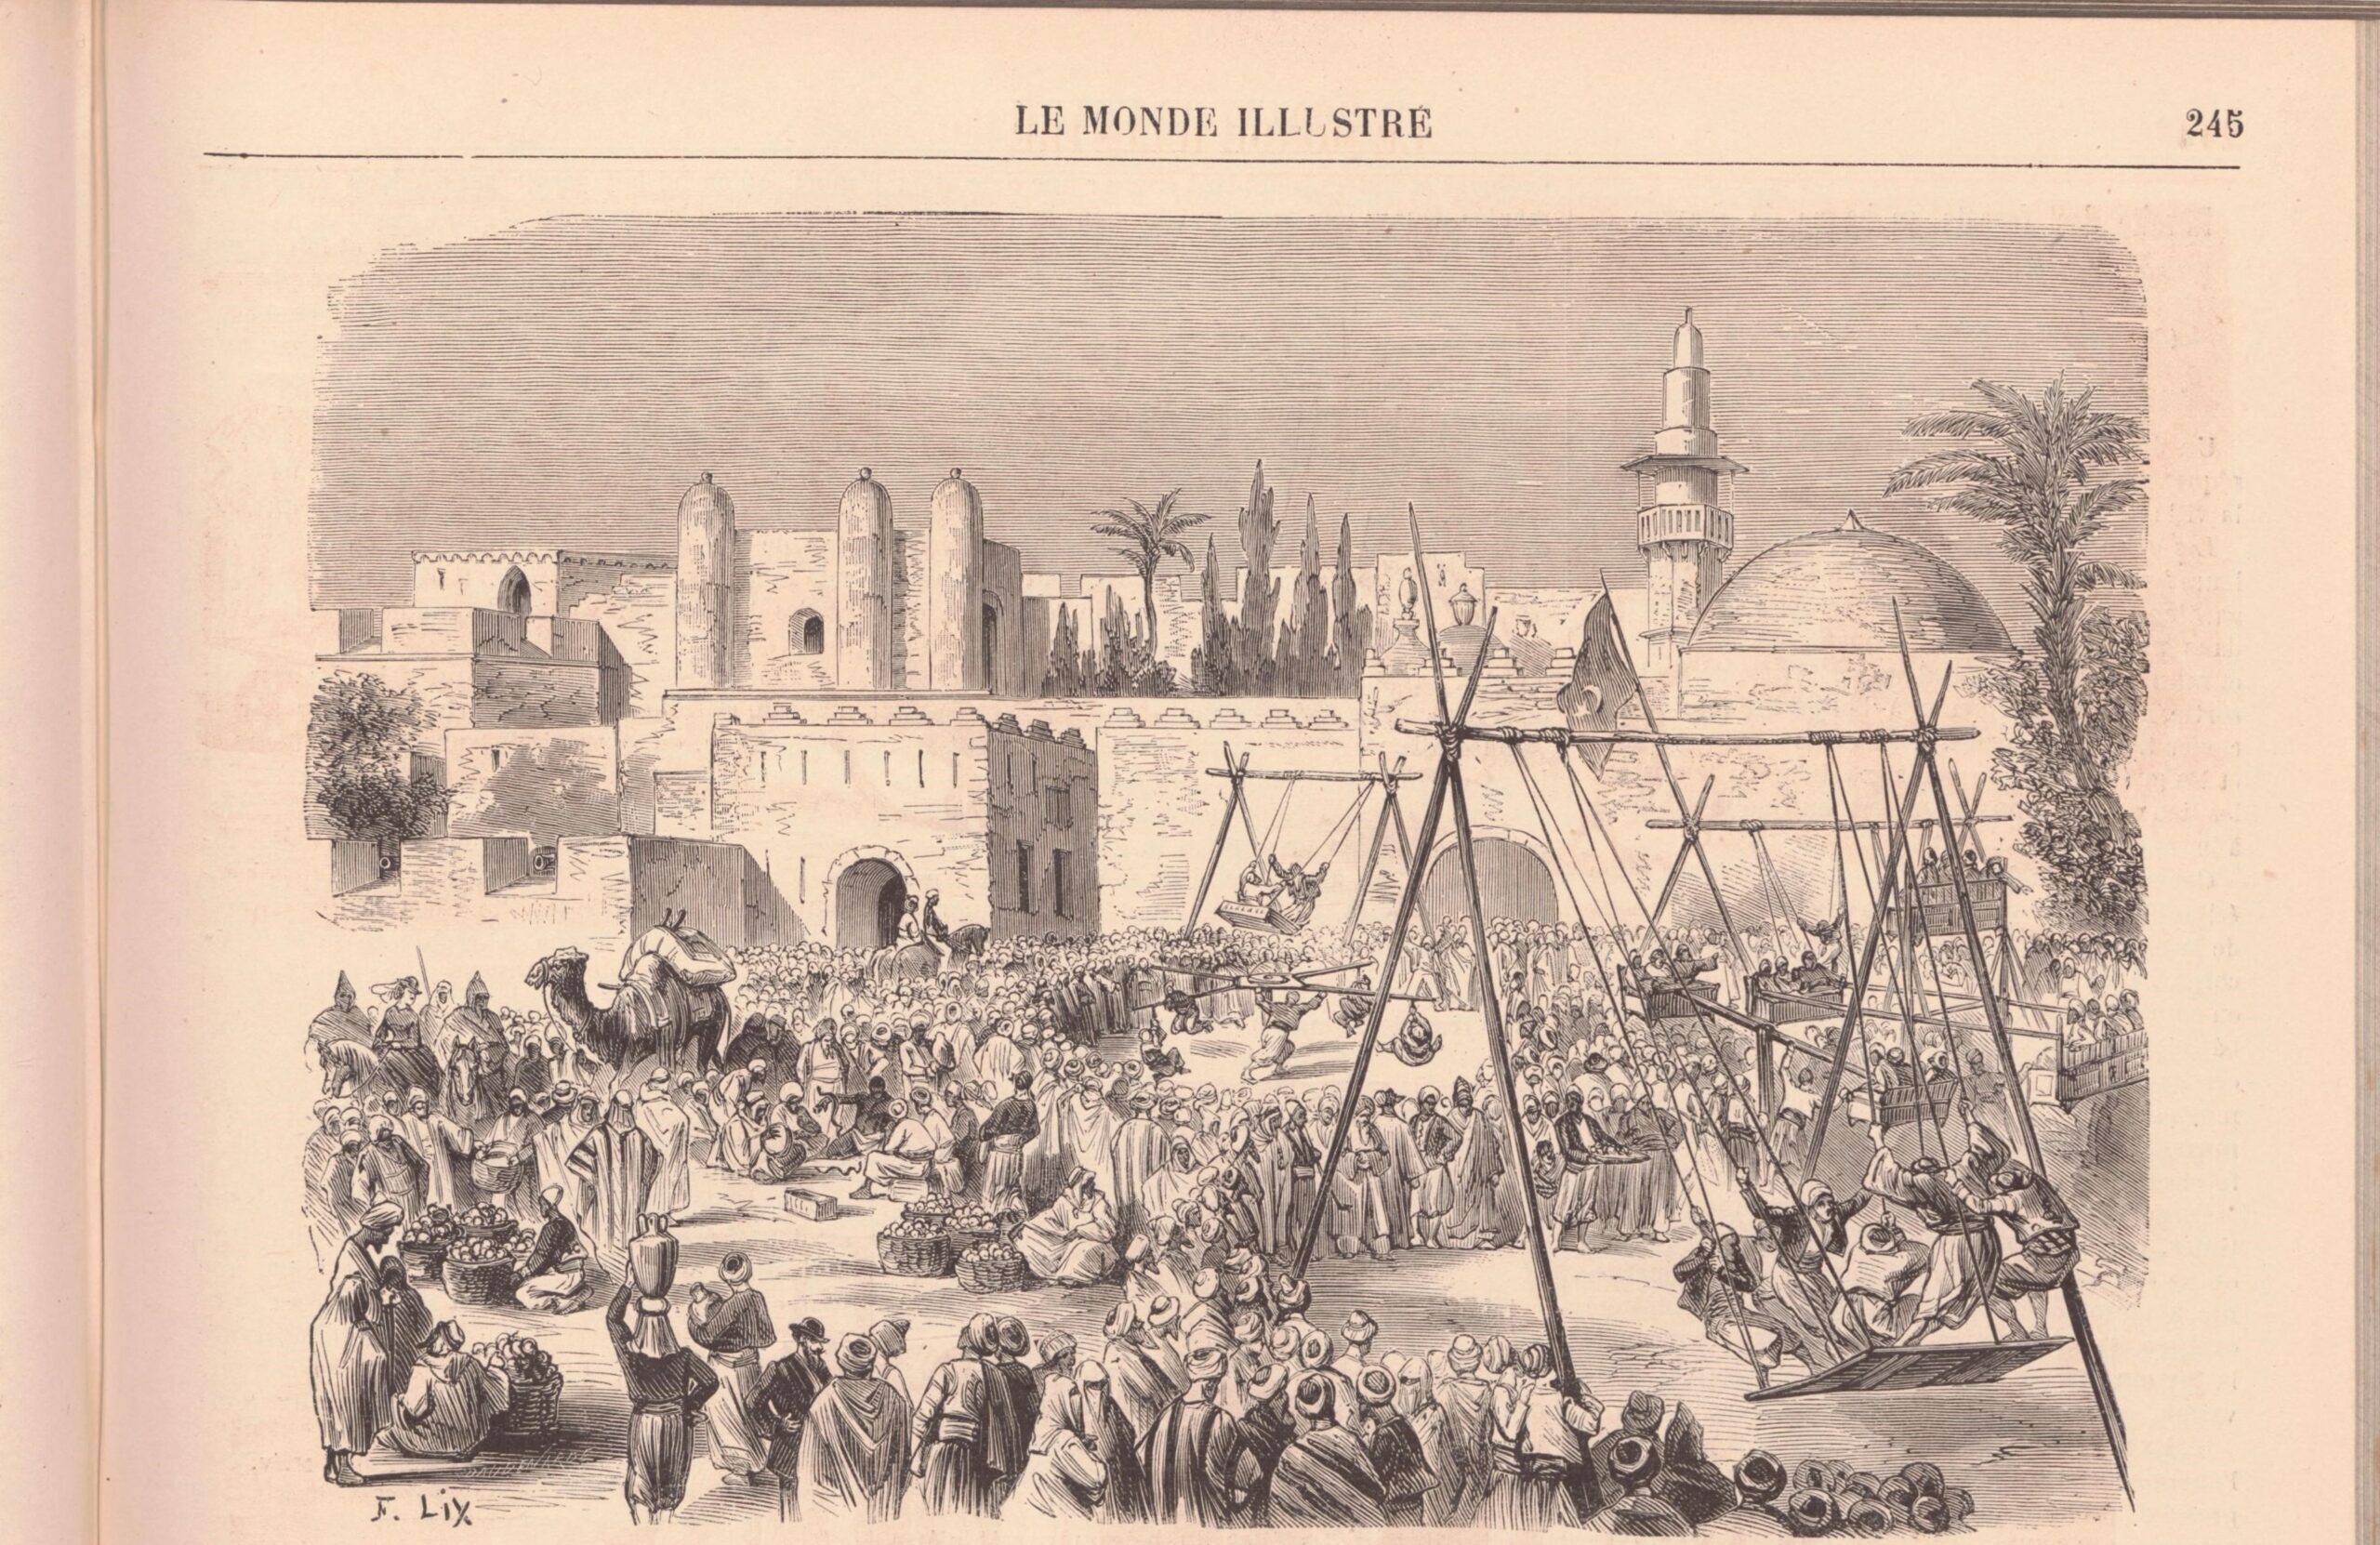 Eid celebrations in historical Palestine: From Ottoman peace to present-day conflict